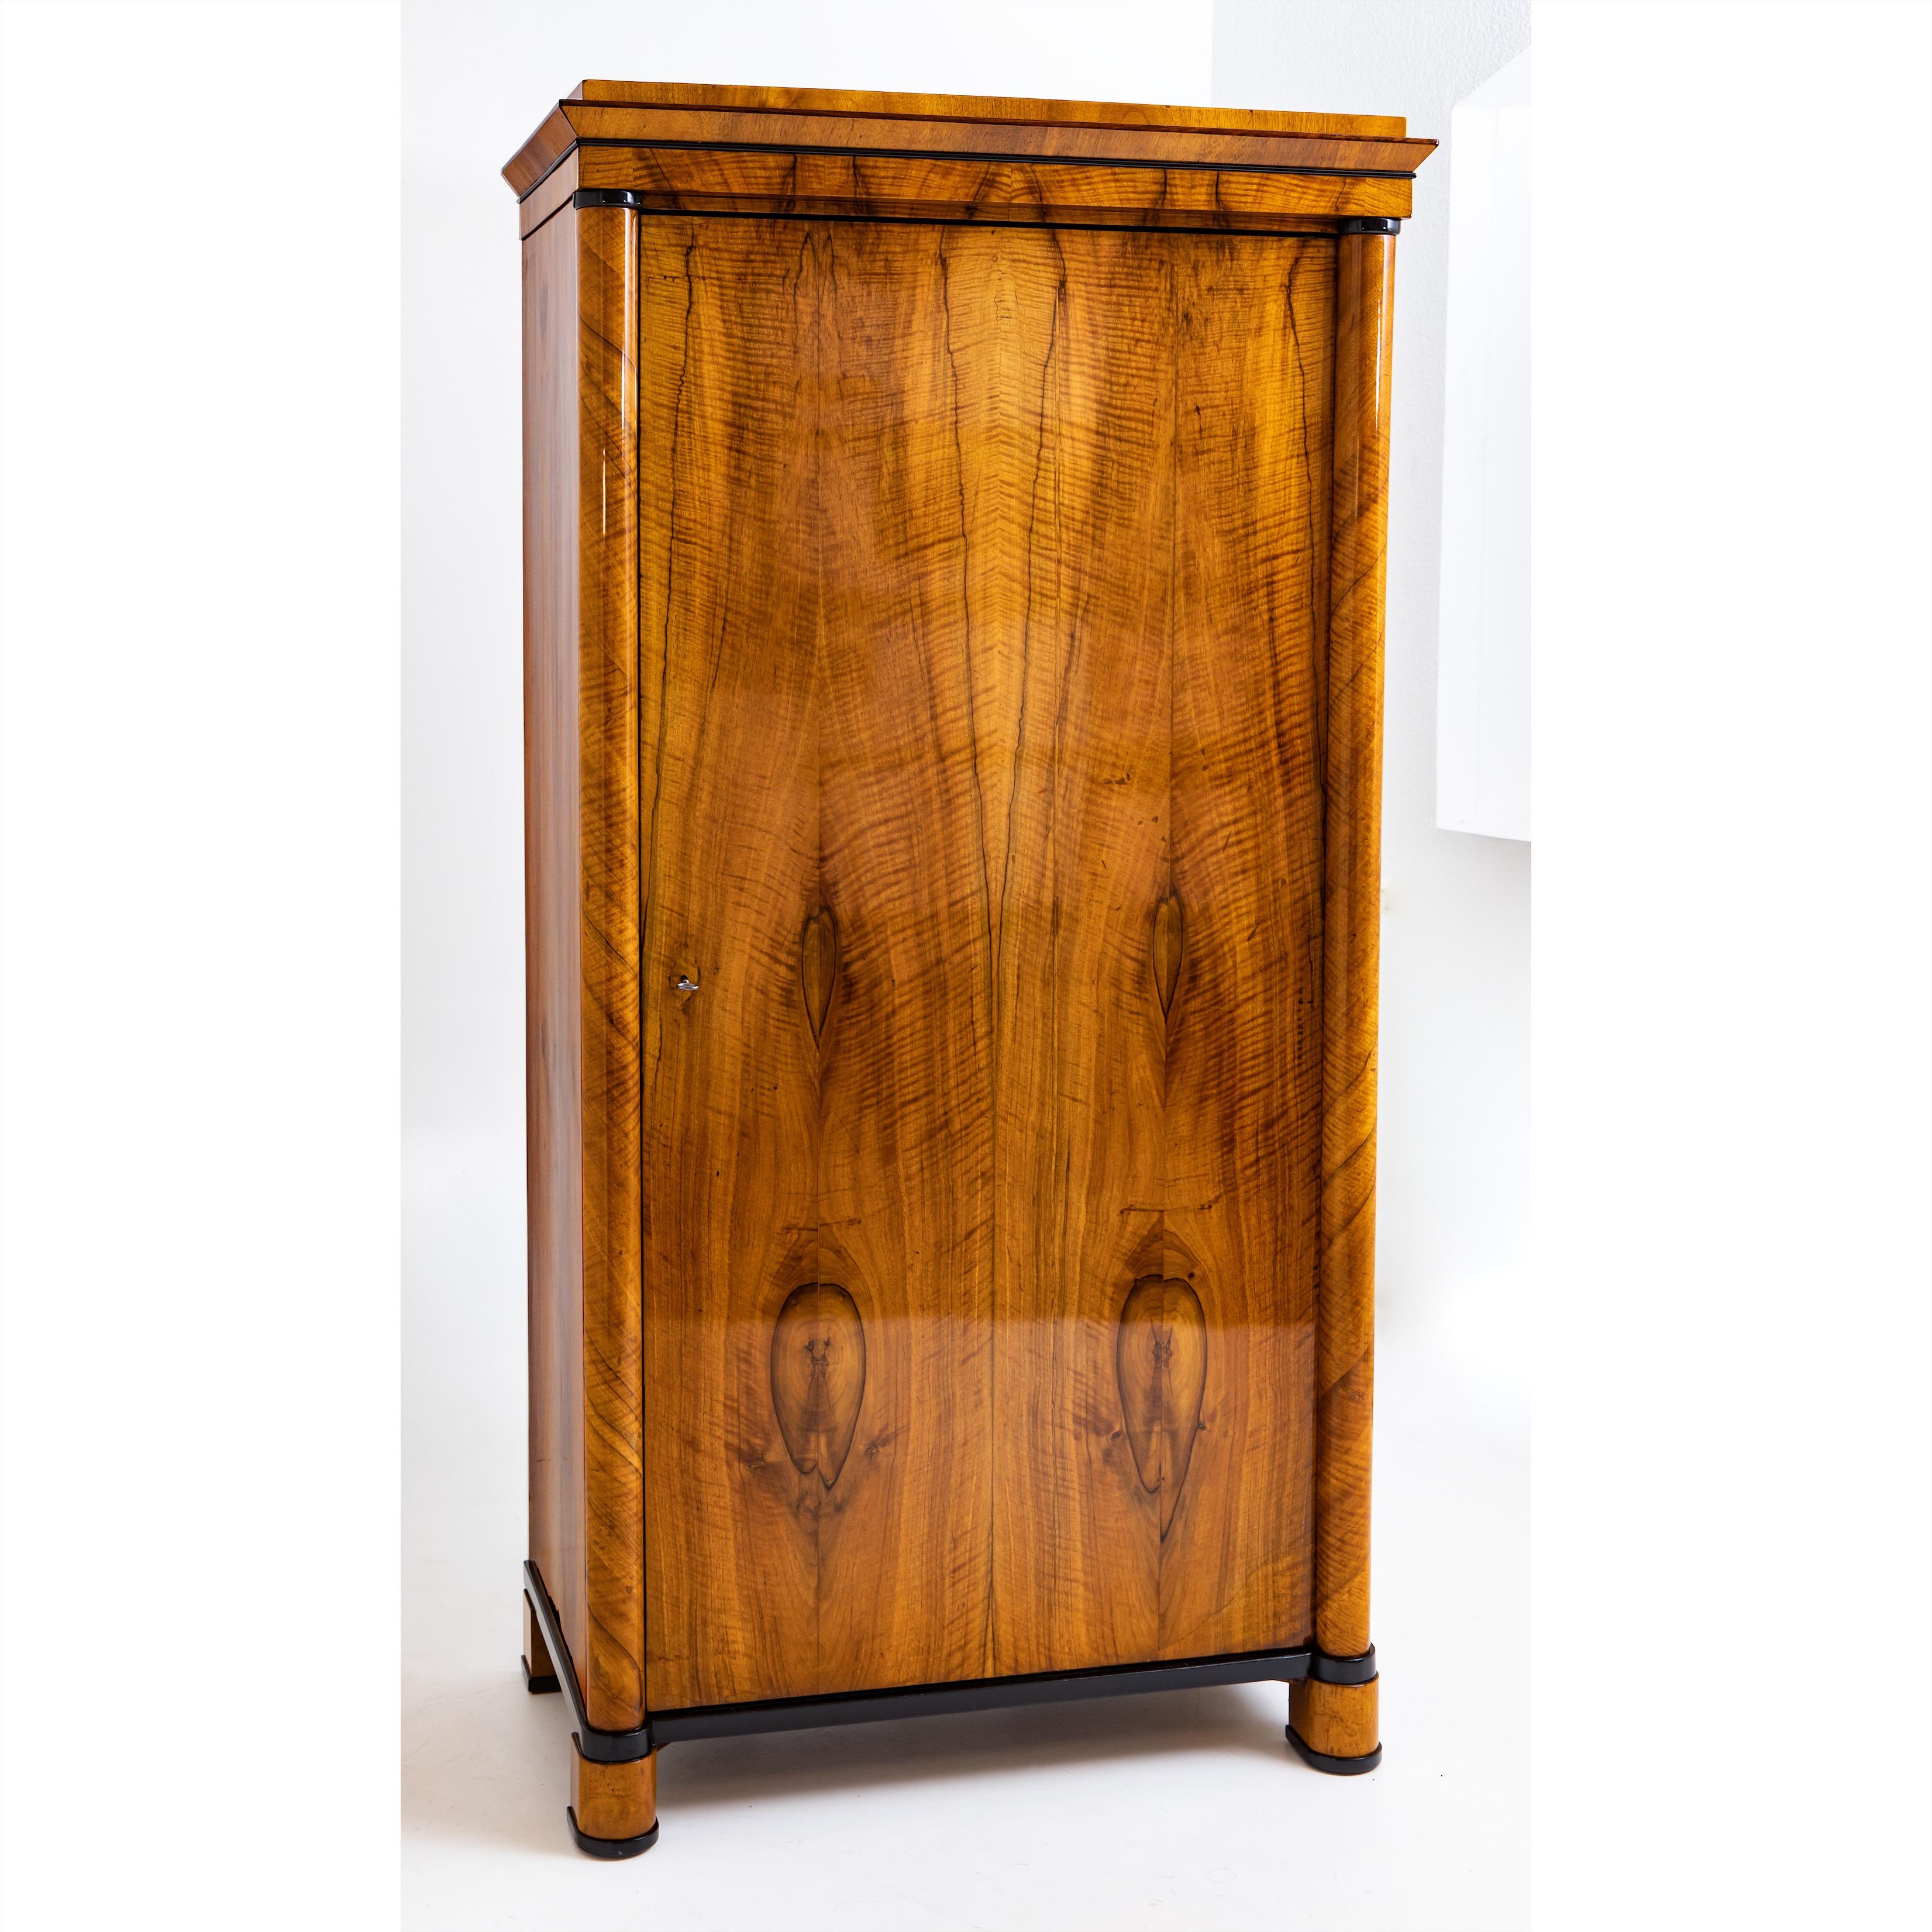 Single door Biedermeier cabinet with ebonized details and rounded corners. Very nice veneer pattern. The straight cornice is profiled and optically structured by ebonized strips. The interior division consists of five height-adjustable shelves. The